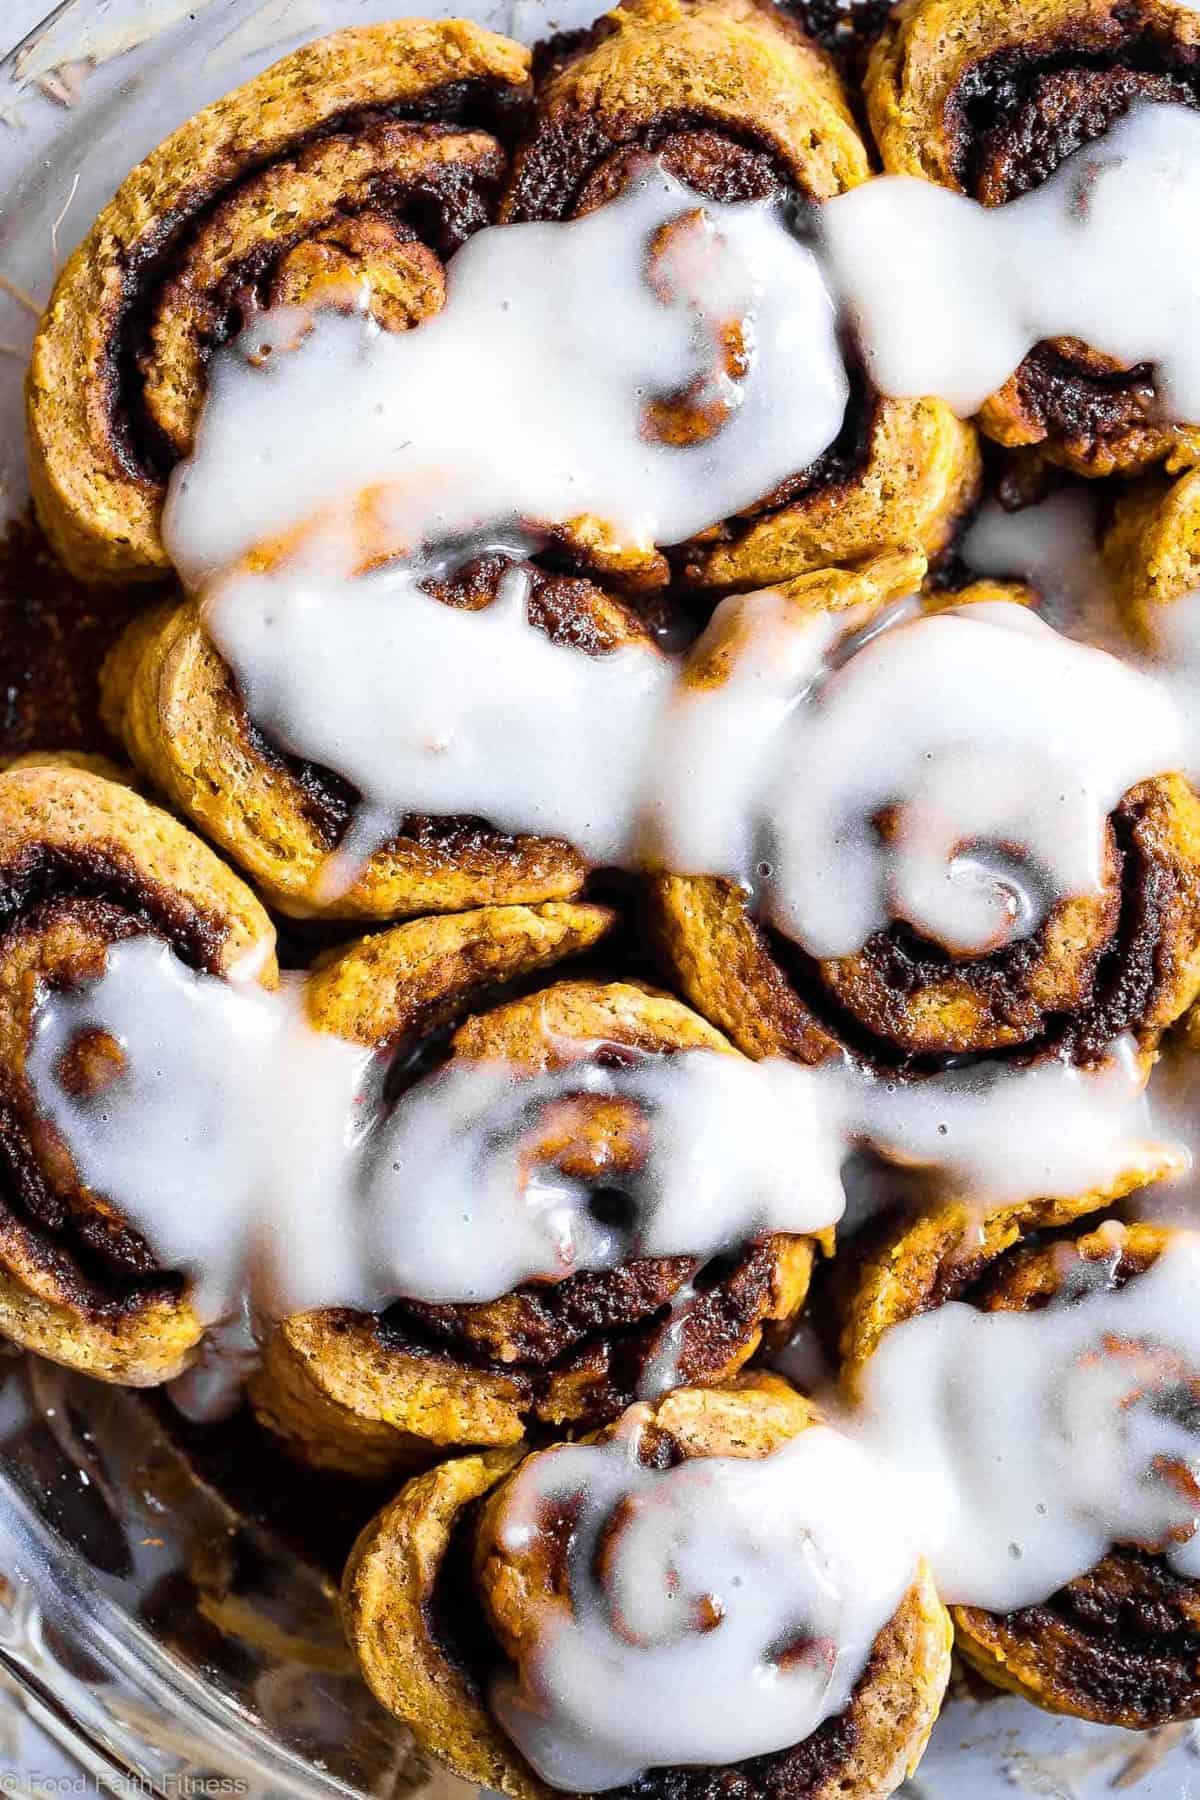 Gluten Free Vegan Pumpkin Cinnamon Rolls - These easy Pumpkin Spice Cinnamon Rolls are so soft and fluffy you won't believe they're gluten, dairy and egg free! Loaded with spicy-sweet fall flavor and SO delicious! | #Foodfaithfitness | #Glutenfree #vegan #dairyfree #eggfree #pumpkin